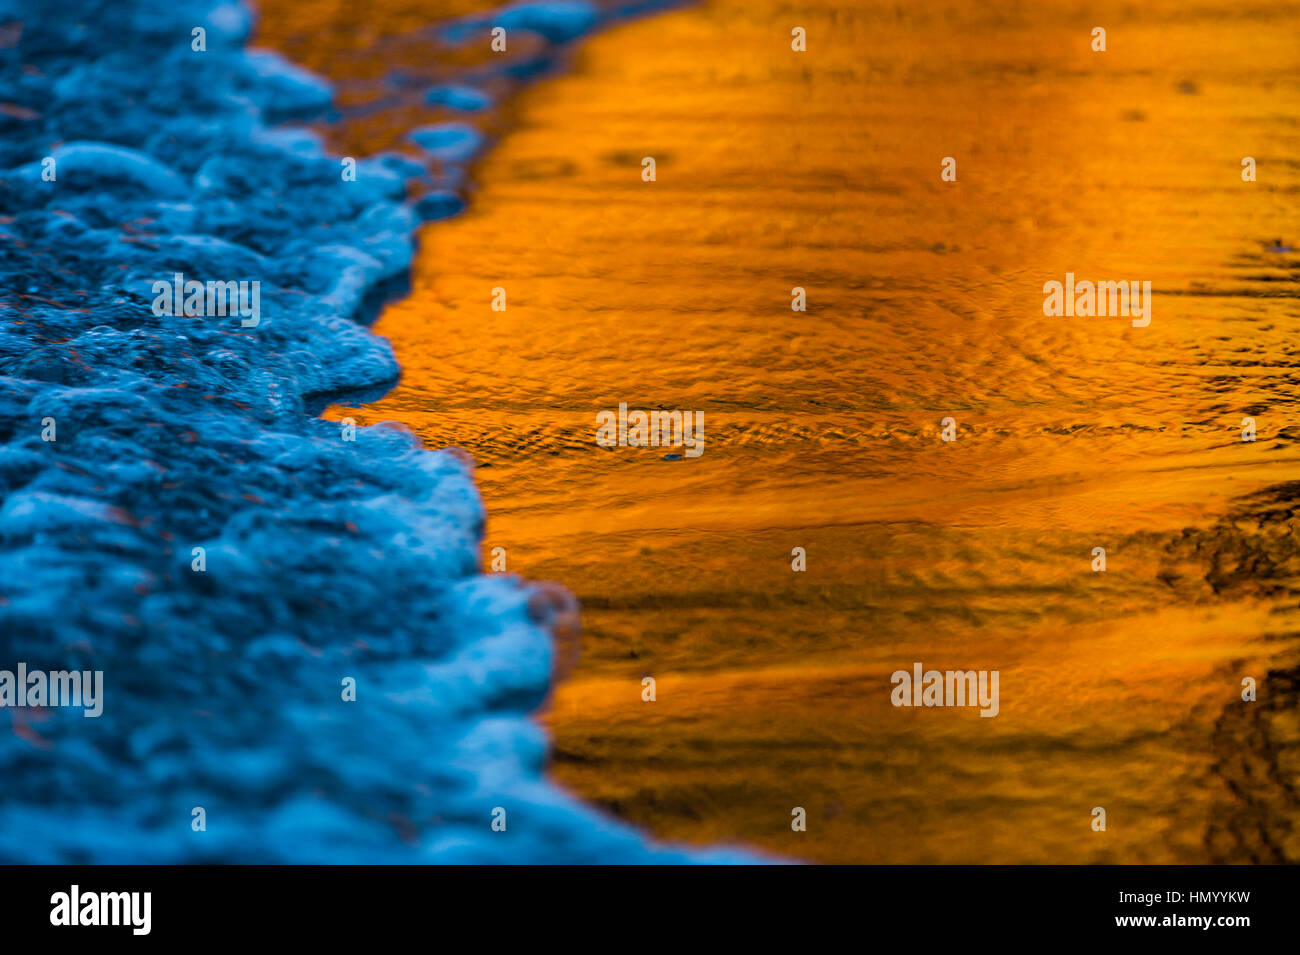 A sandstone cliff reflection in the wet sand on a beach at sunset. Stock Photo